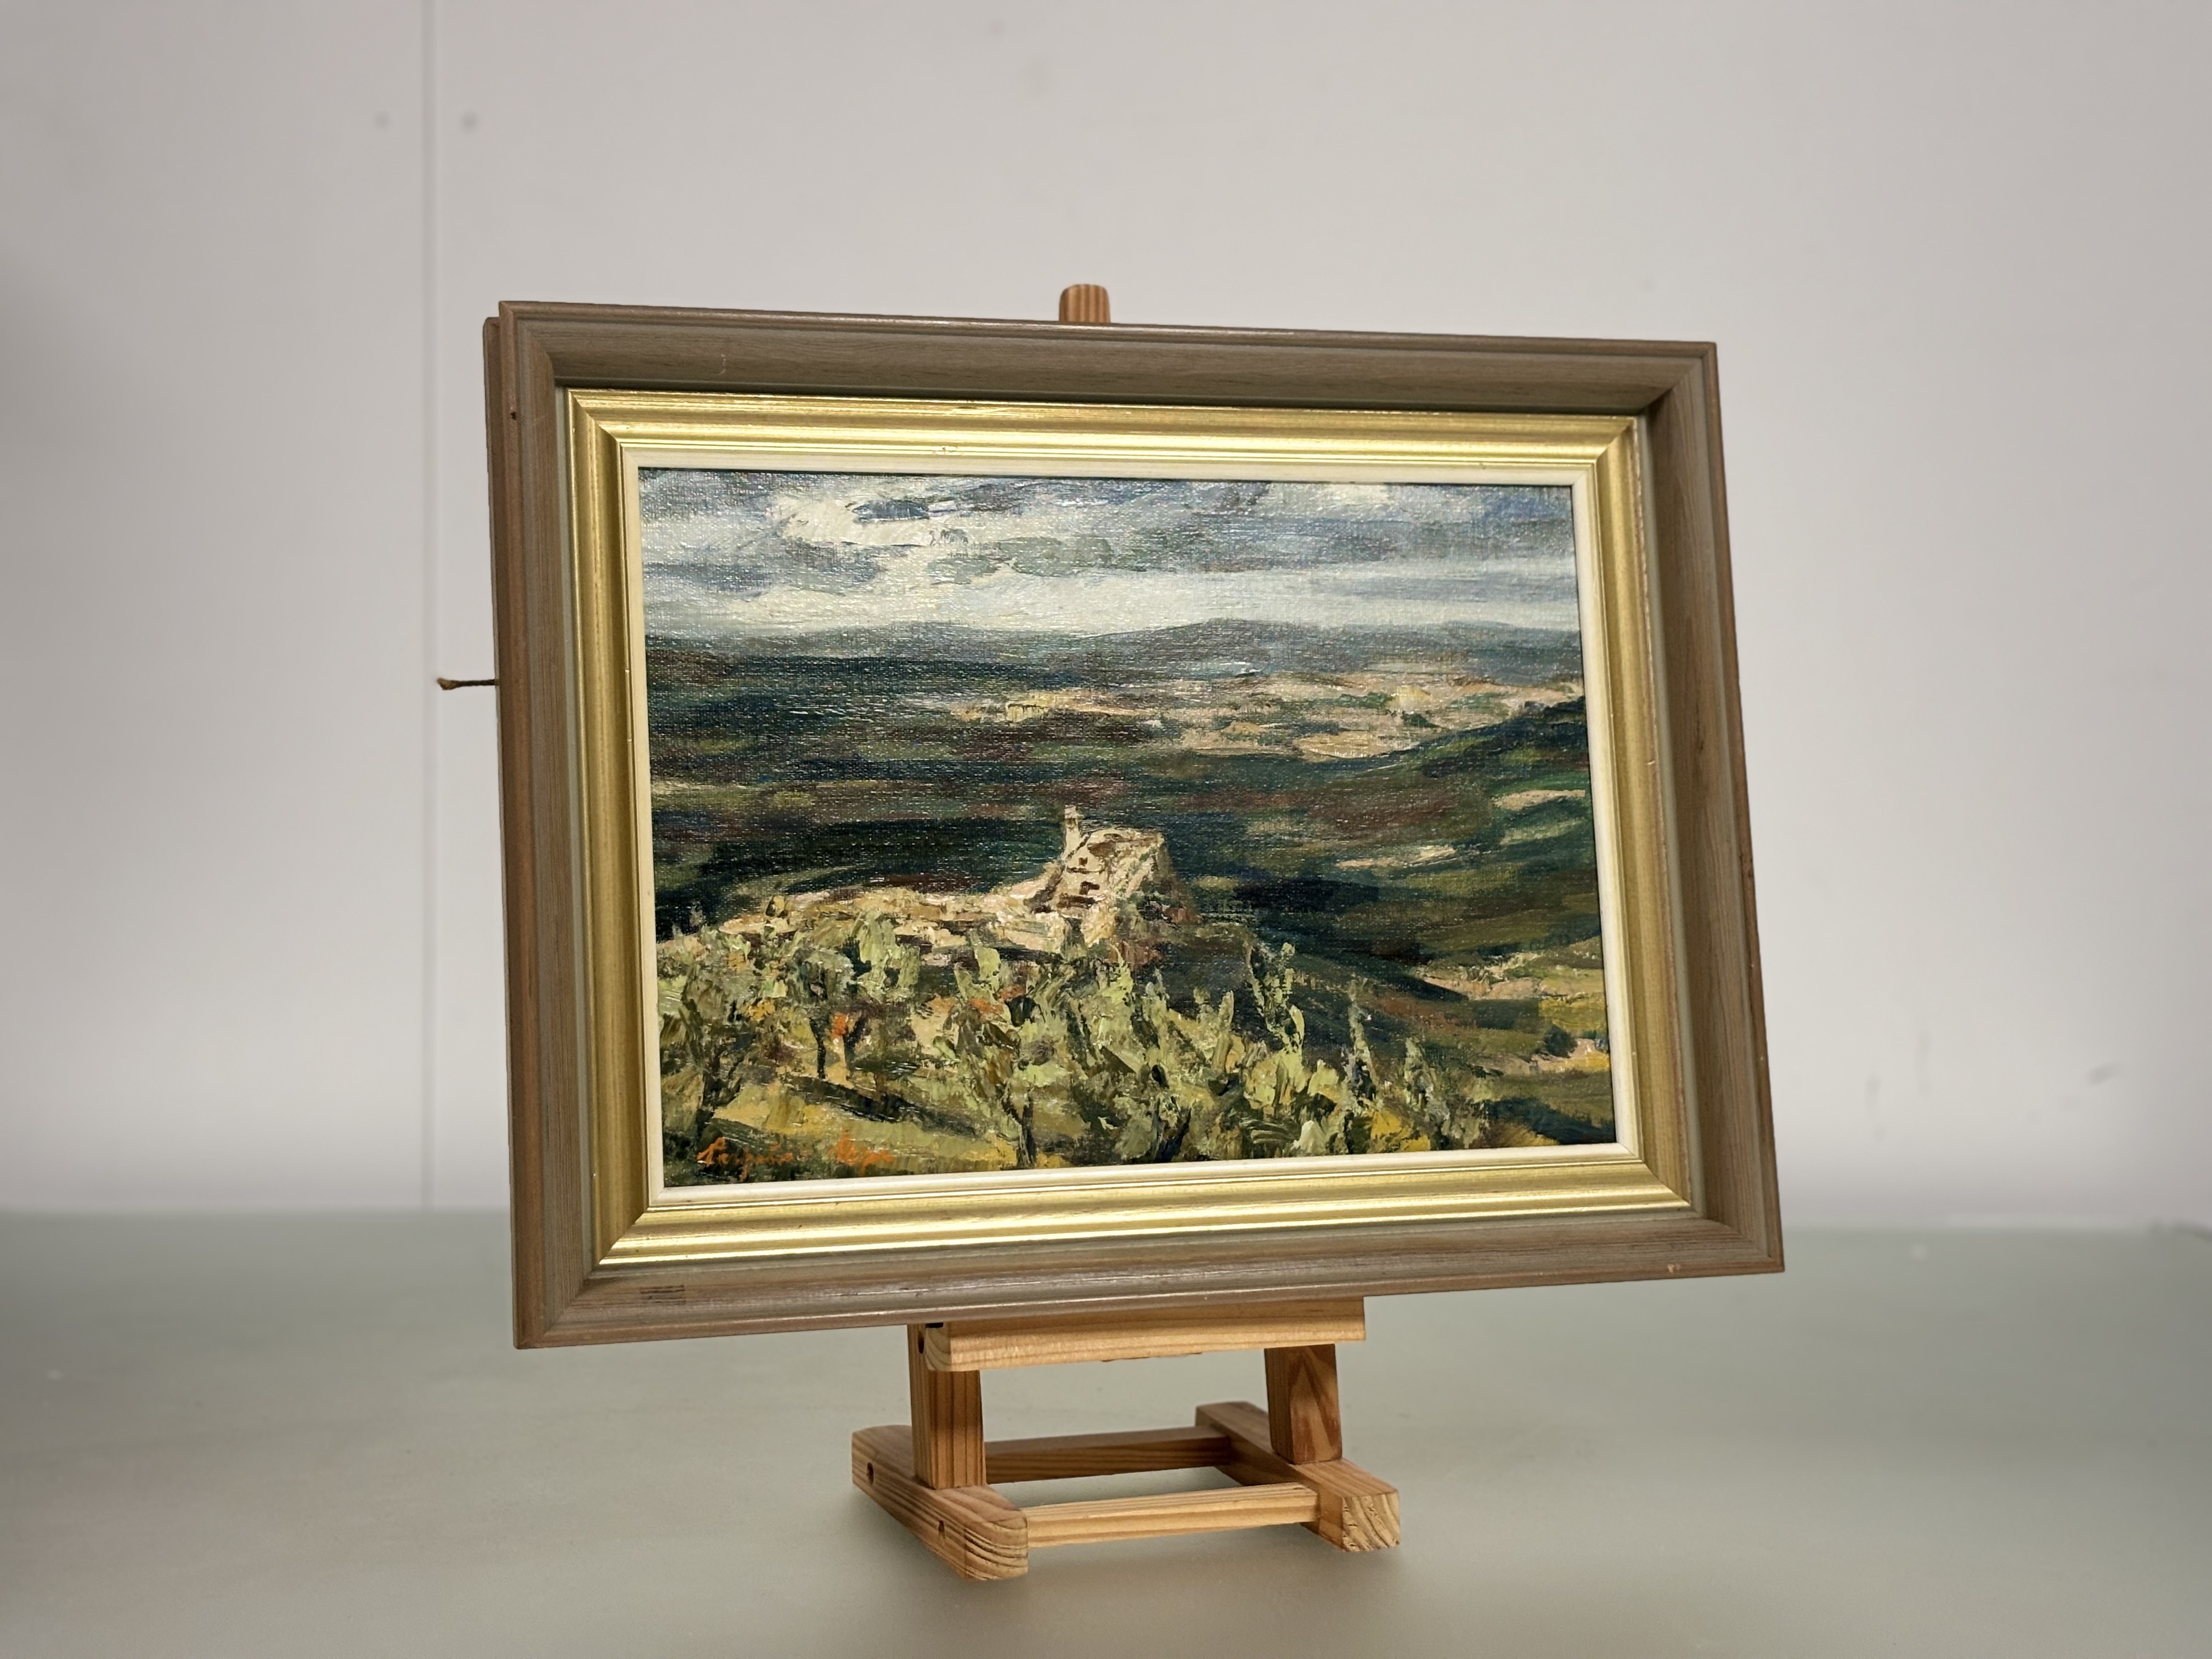 Perpetua Pope (Scottish, 1916-2013), Assisi from Above, signed lower left, oil on board, framed.